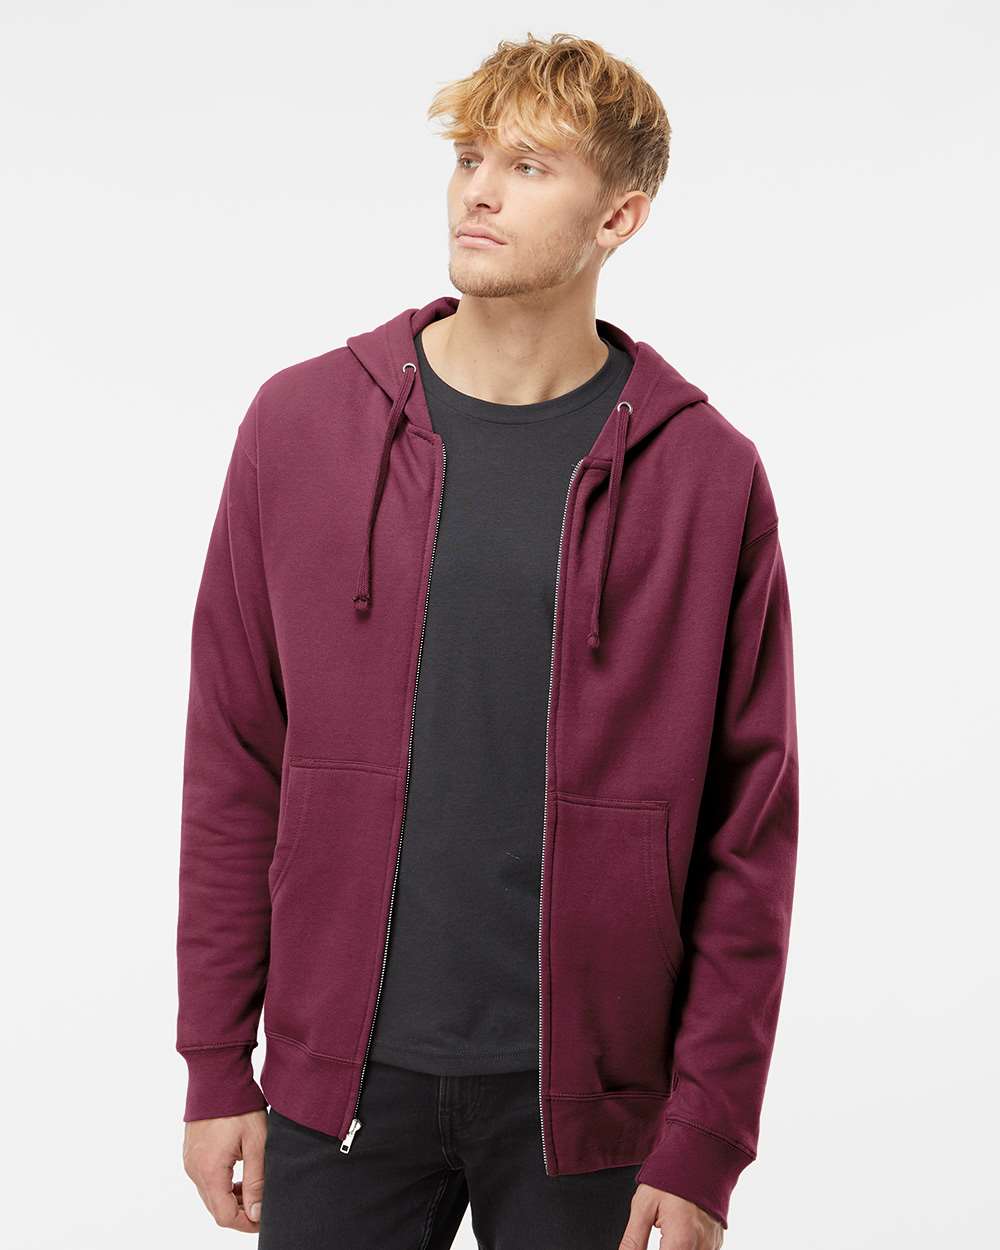 Midweight Full-Zip Hooded Men's Sweatshirt - Independent Trading Co. SS4500Z